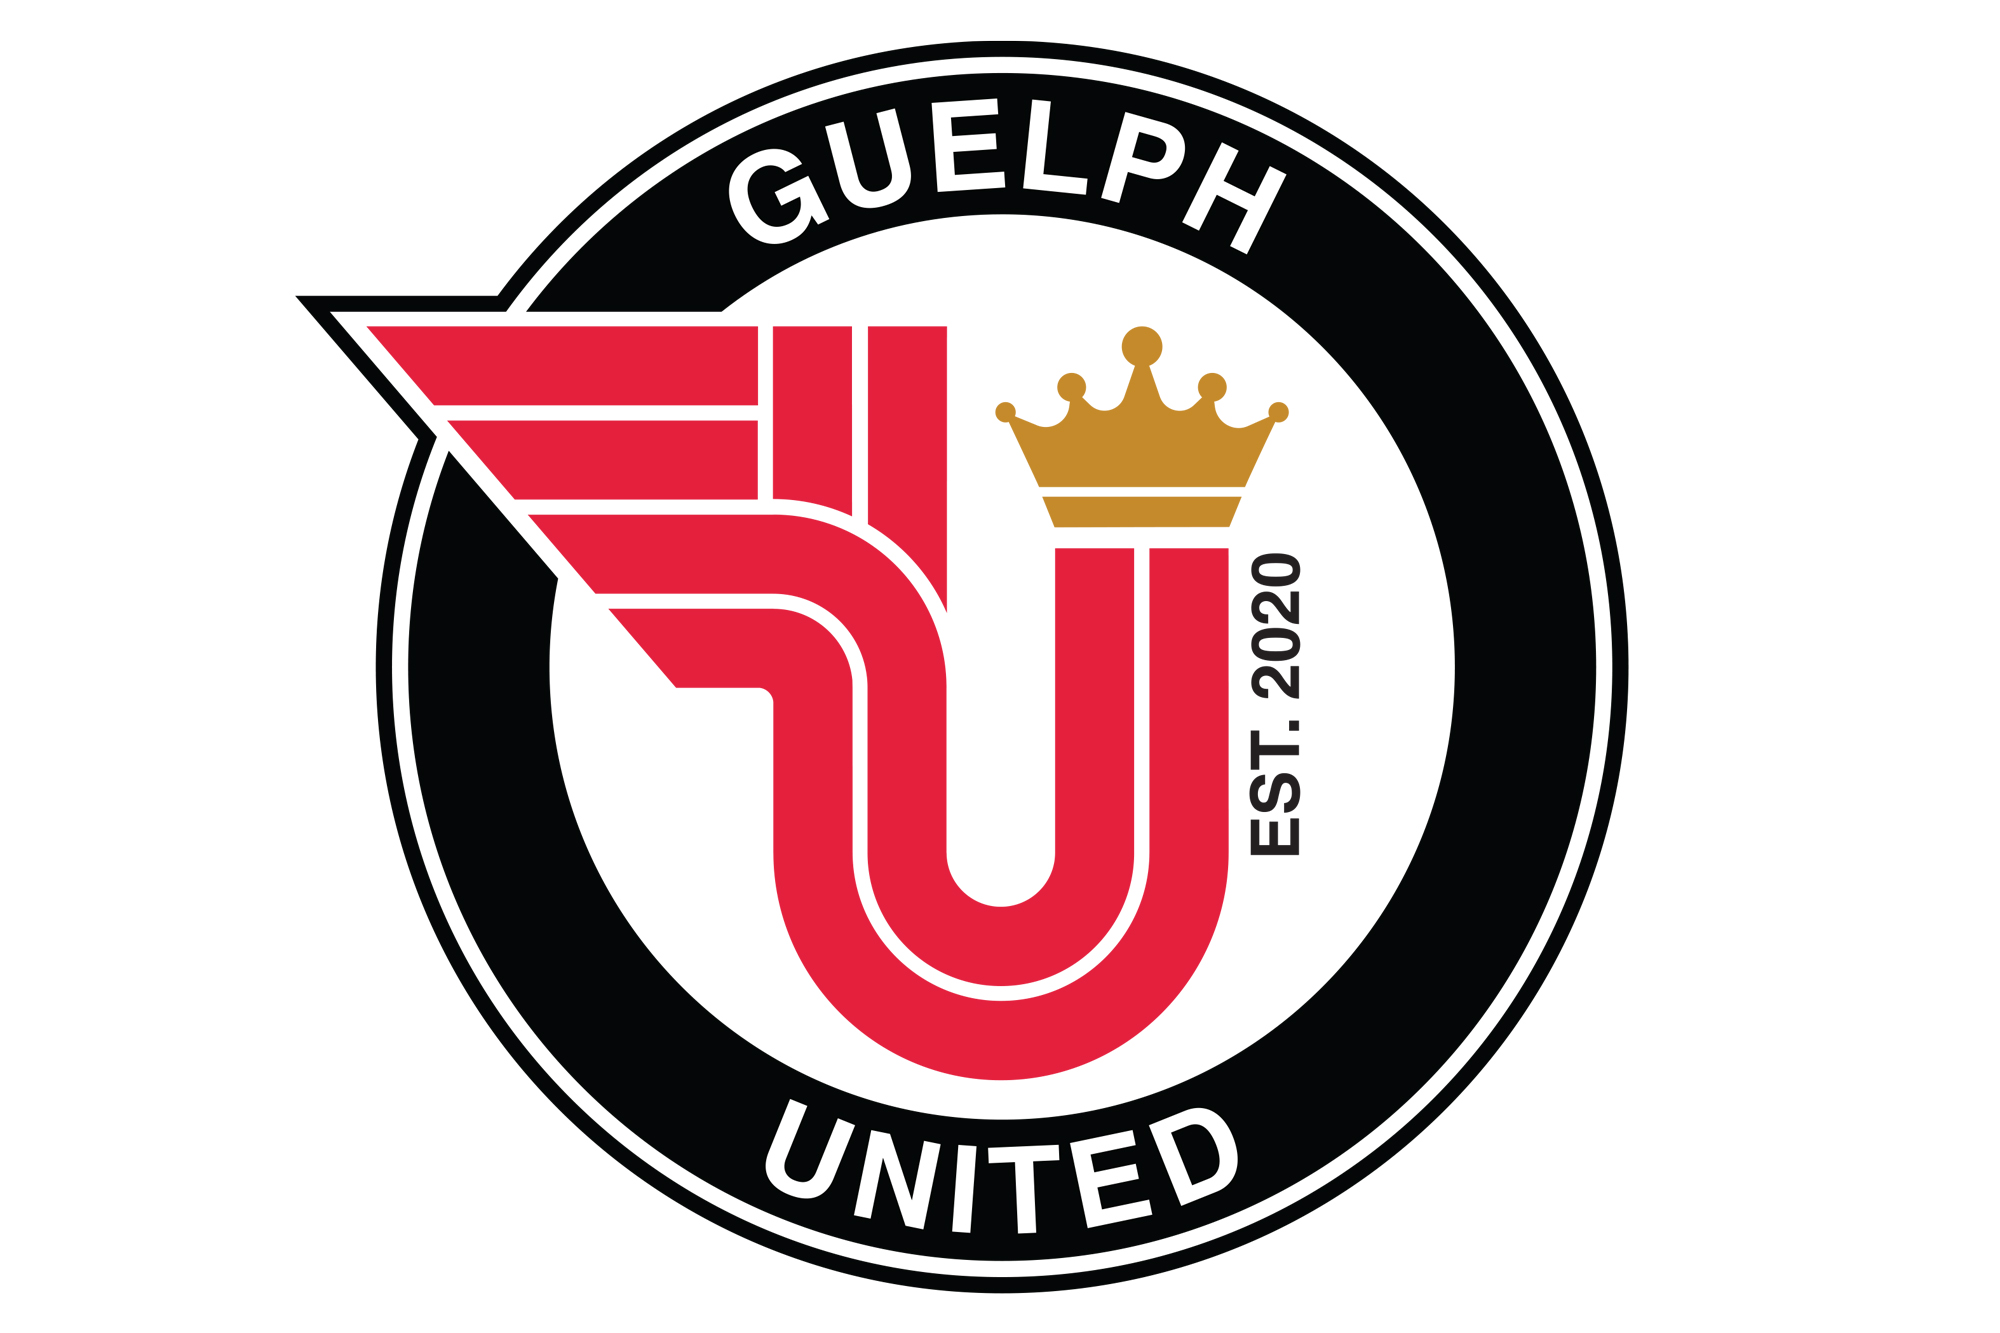 No guarantees for Guelph United heading into final weekend